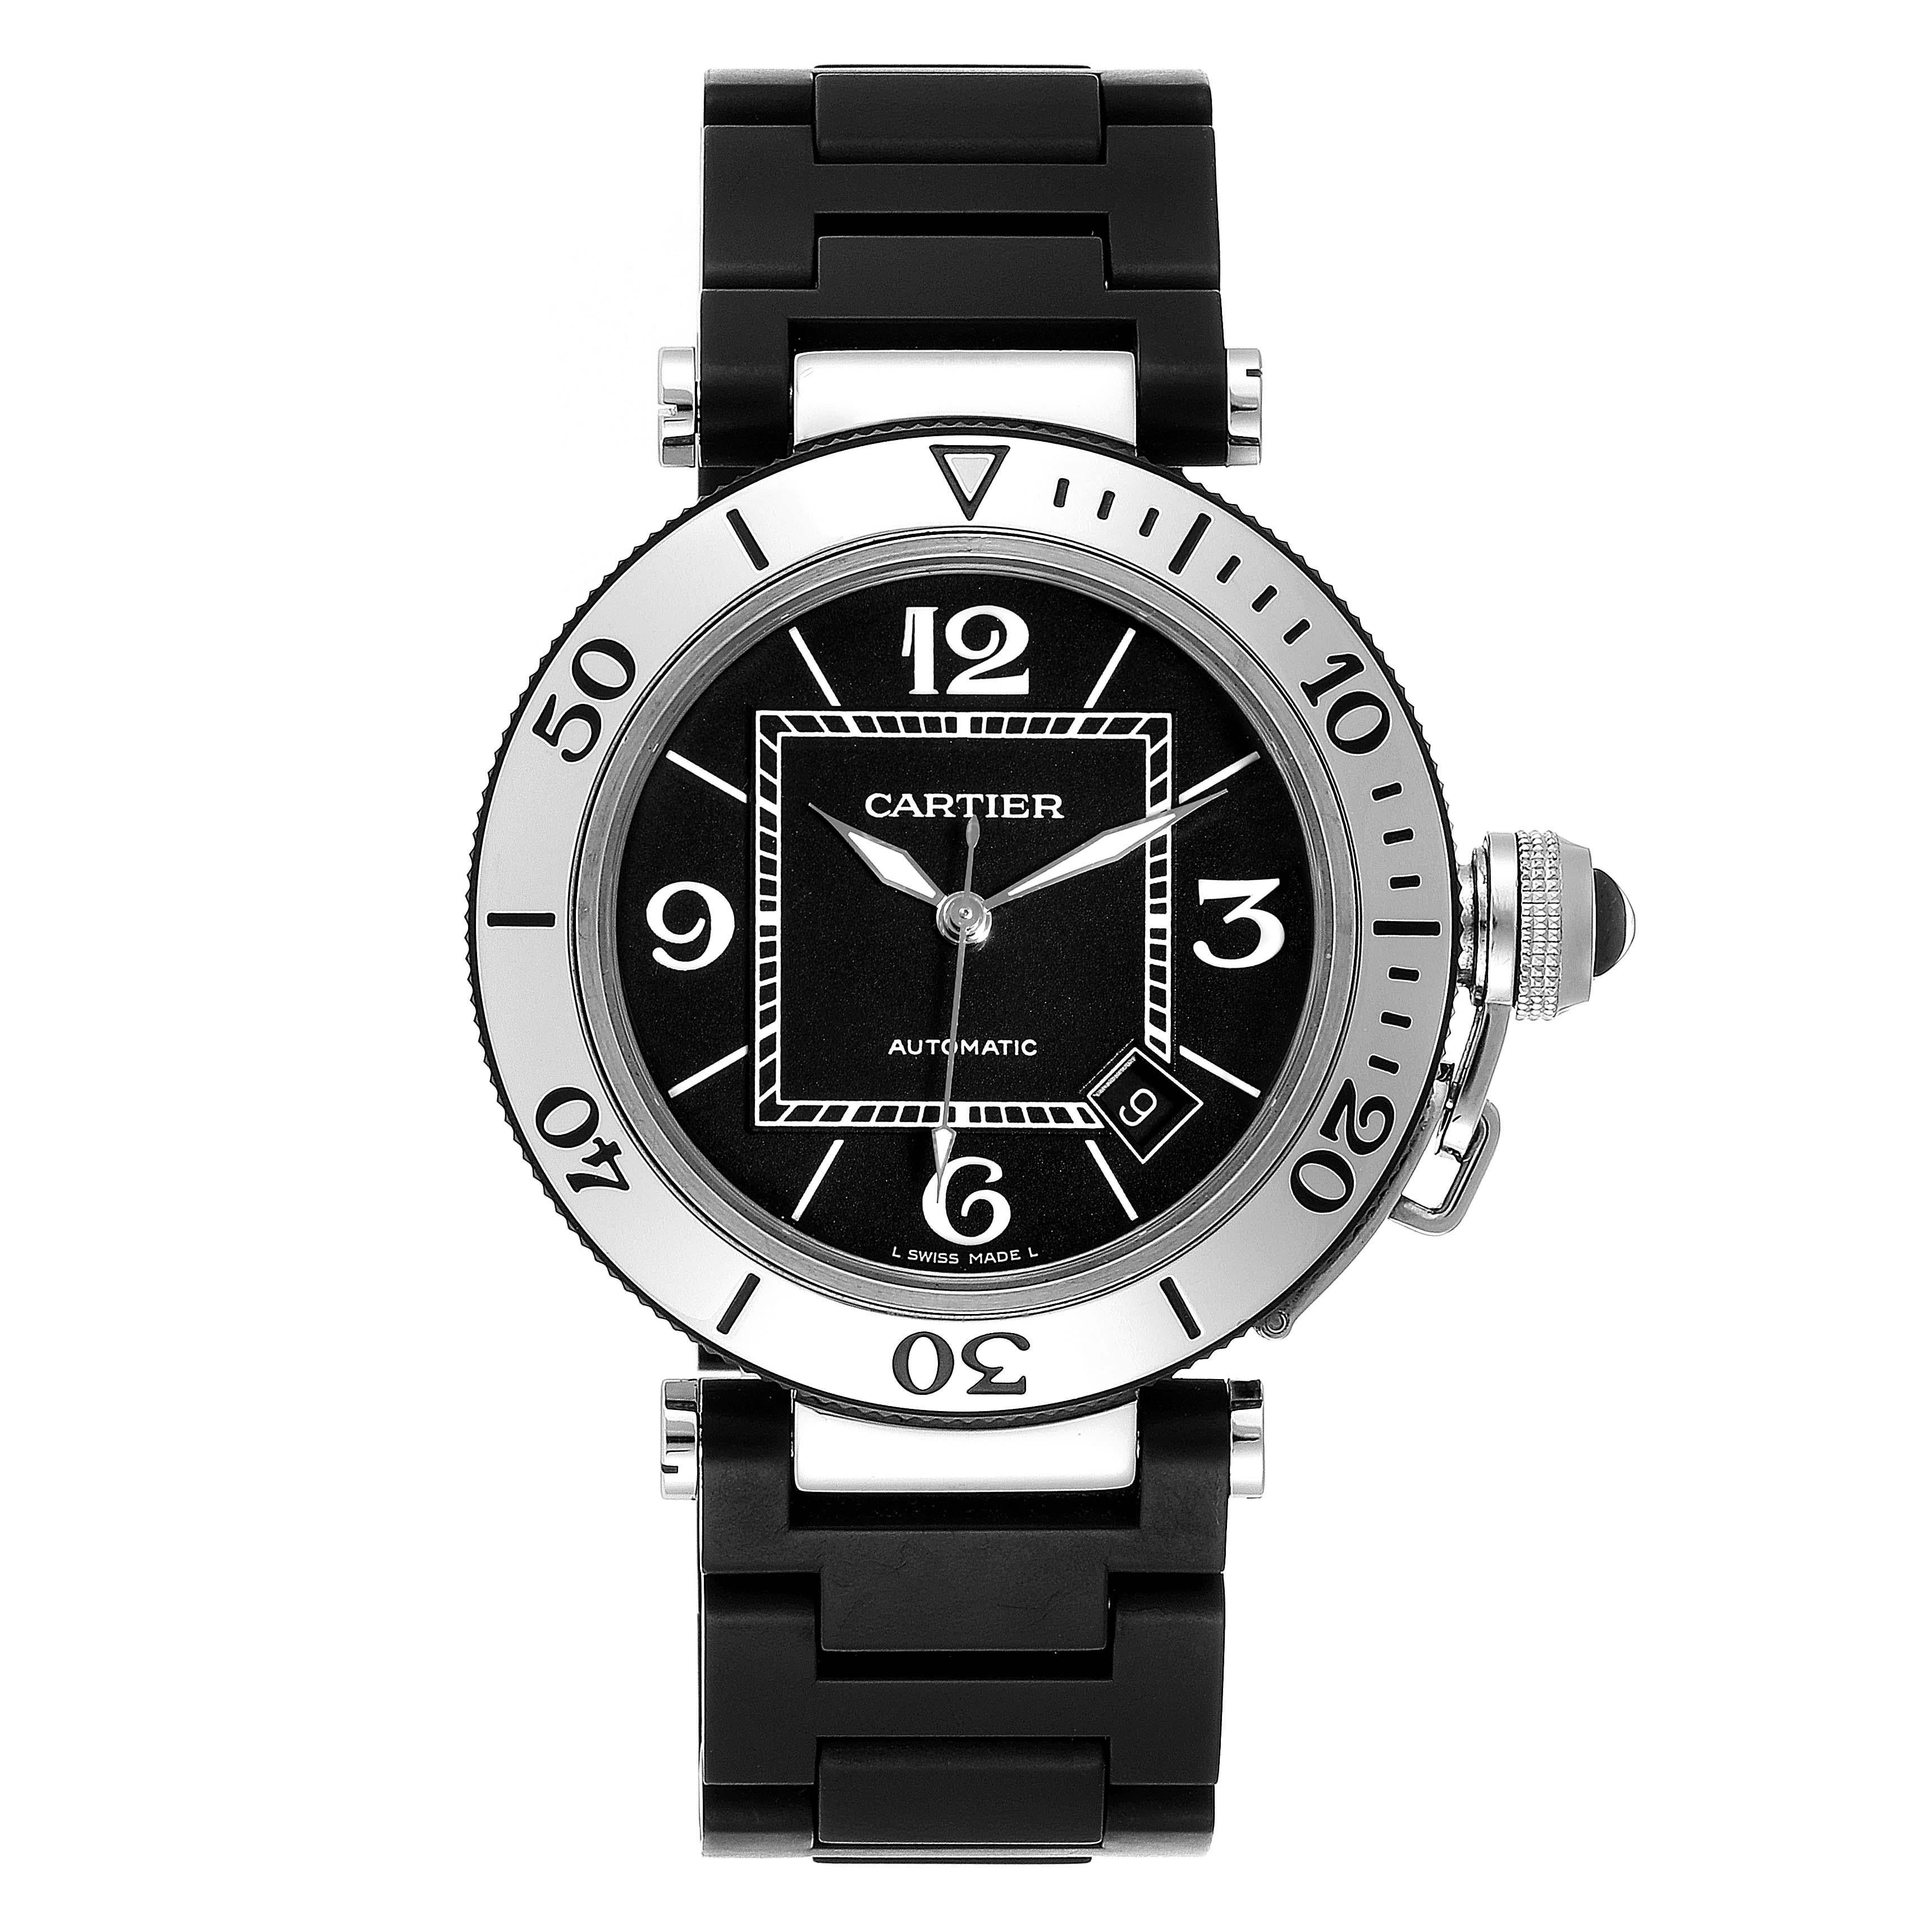 Cartier Pasha Seatimer Chronograph Rubber Strap Watch W31088U2 Box. Automatic self-winding movement. Stainless steel case 41.5 mm in diameter. Crown cover with black spinel. Unidirectional rotative bezel with engraved arabic numerals. Scratch